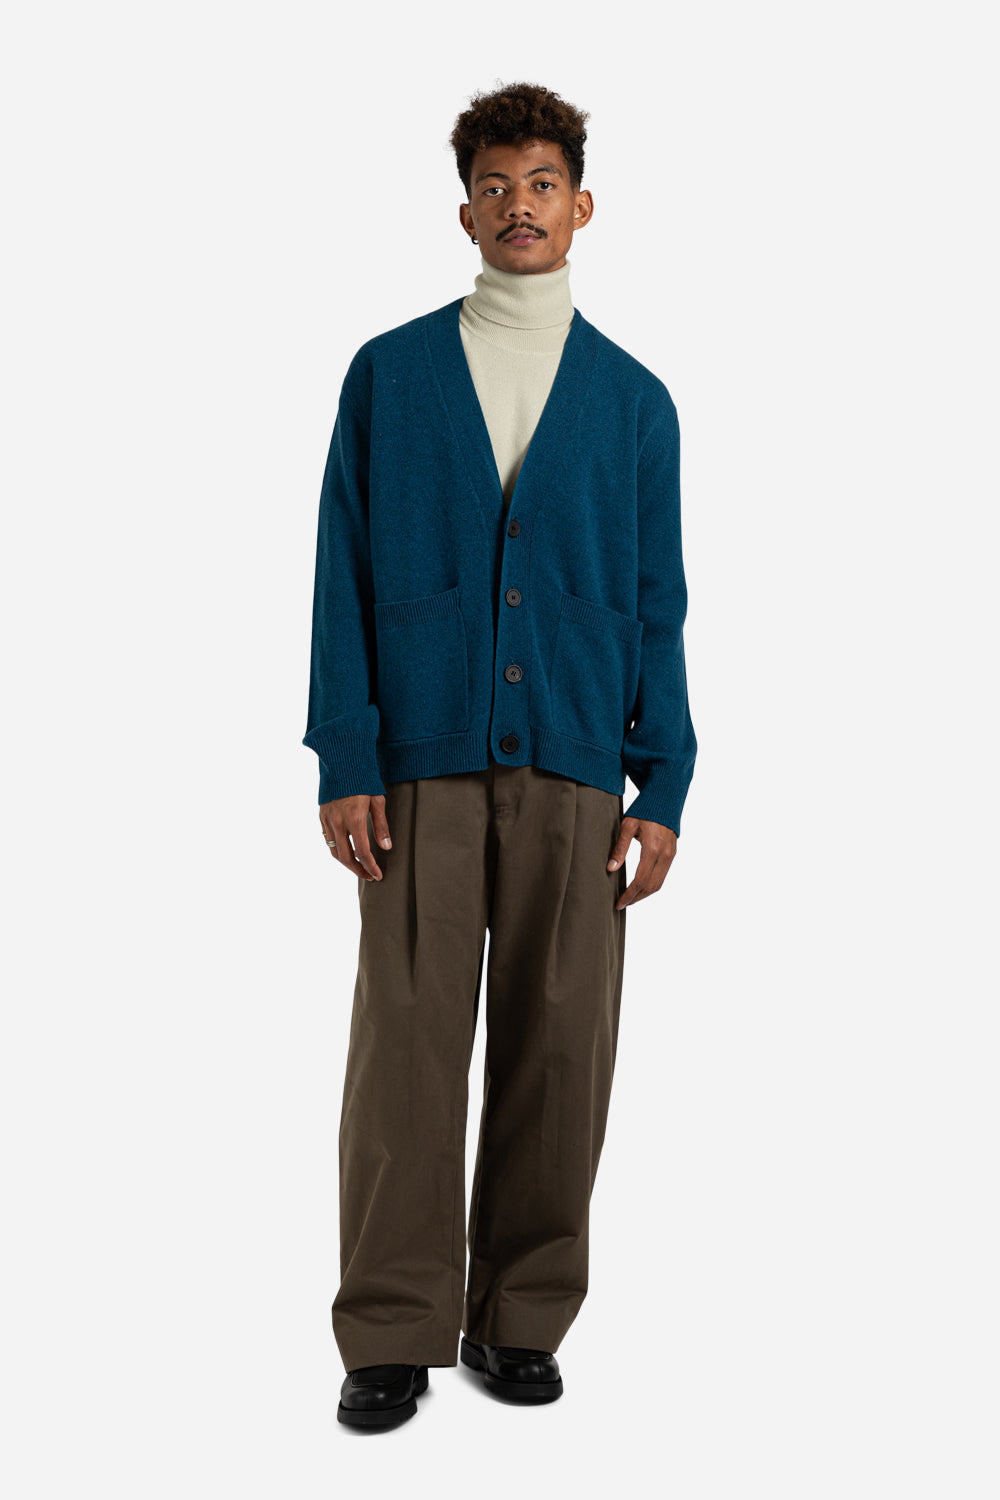 Studio Nicholson Aire Knit Cardigan in Diesel - Wallace Mercantile Sho